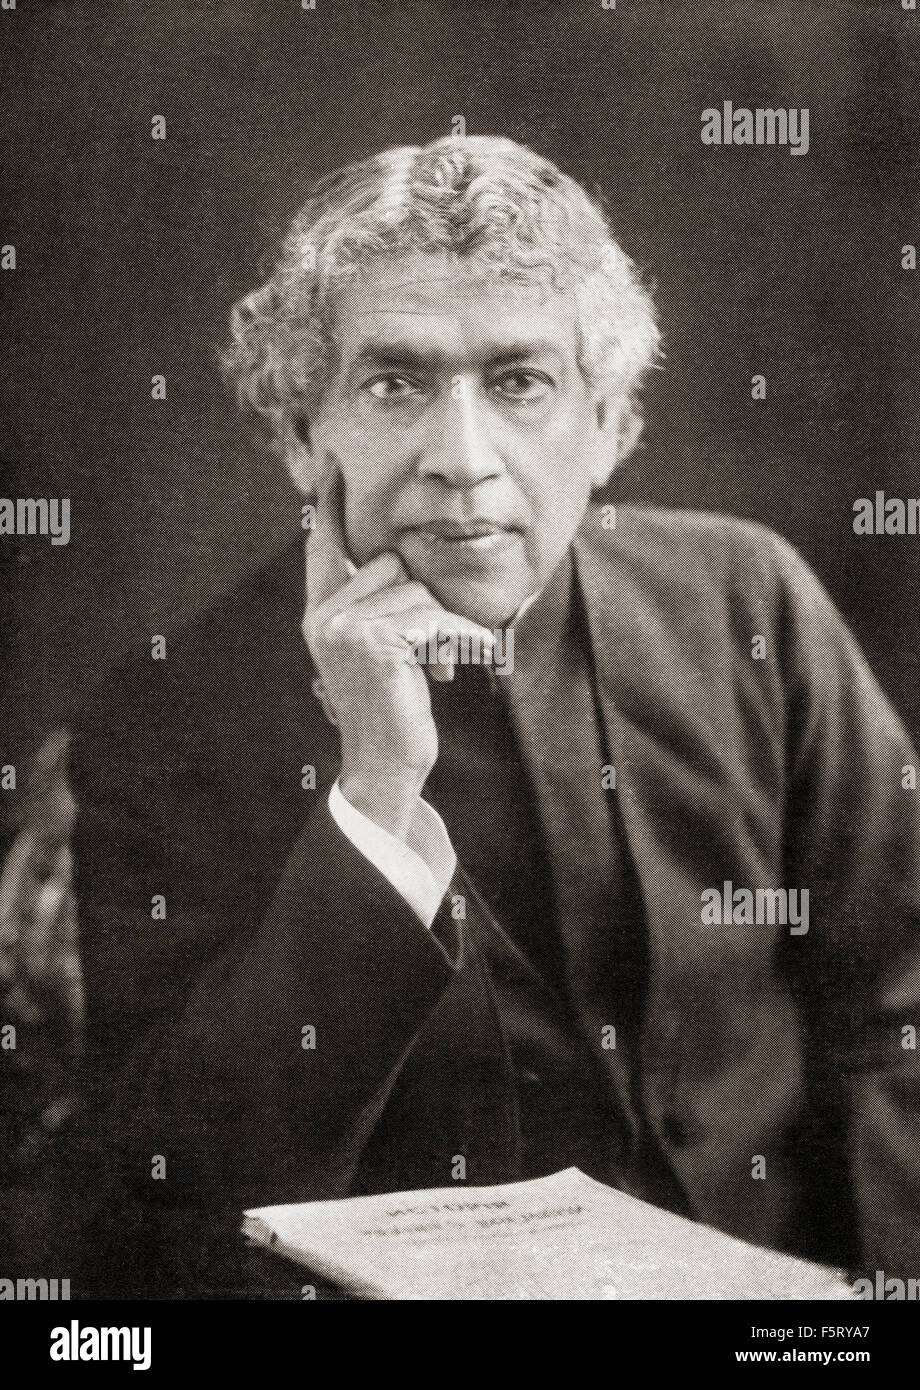 Mahidhara Projects on X MahidharaProjects Honors and Remembering the  Great Indian Scientist Acharya Jagadish Chandra Bose on his Birth  Anniversary JagadishChandraBose JCBose BirthAnniversary  httpstco7SycrvrT0M  X